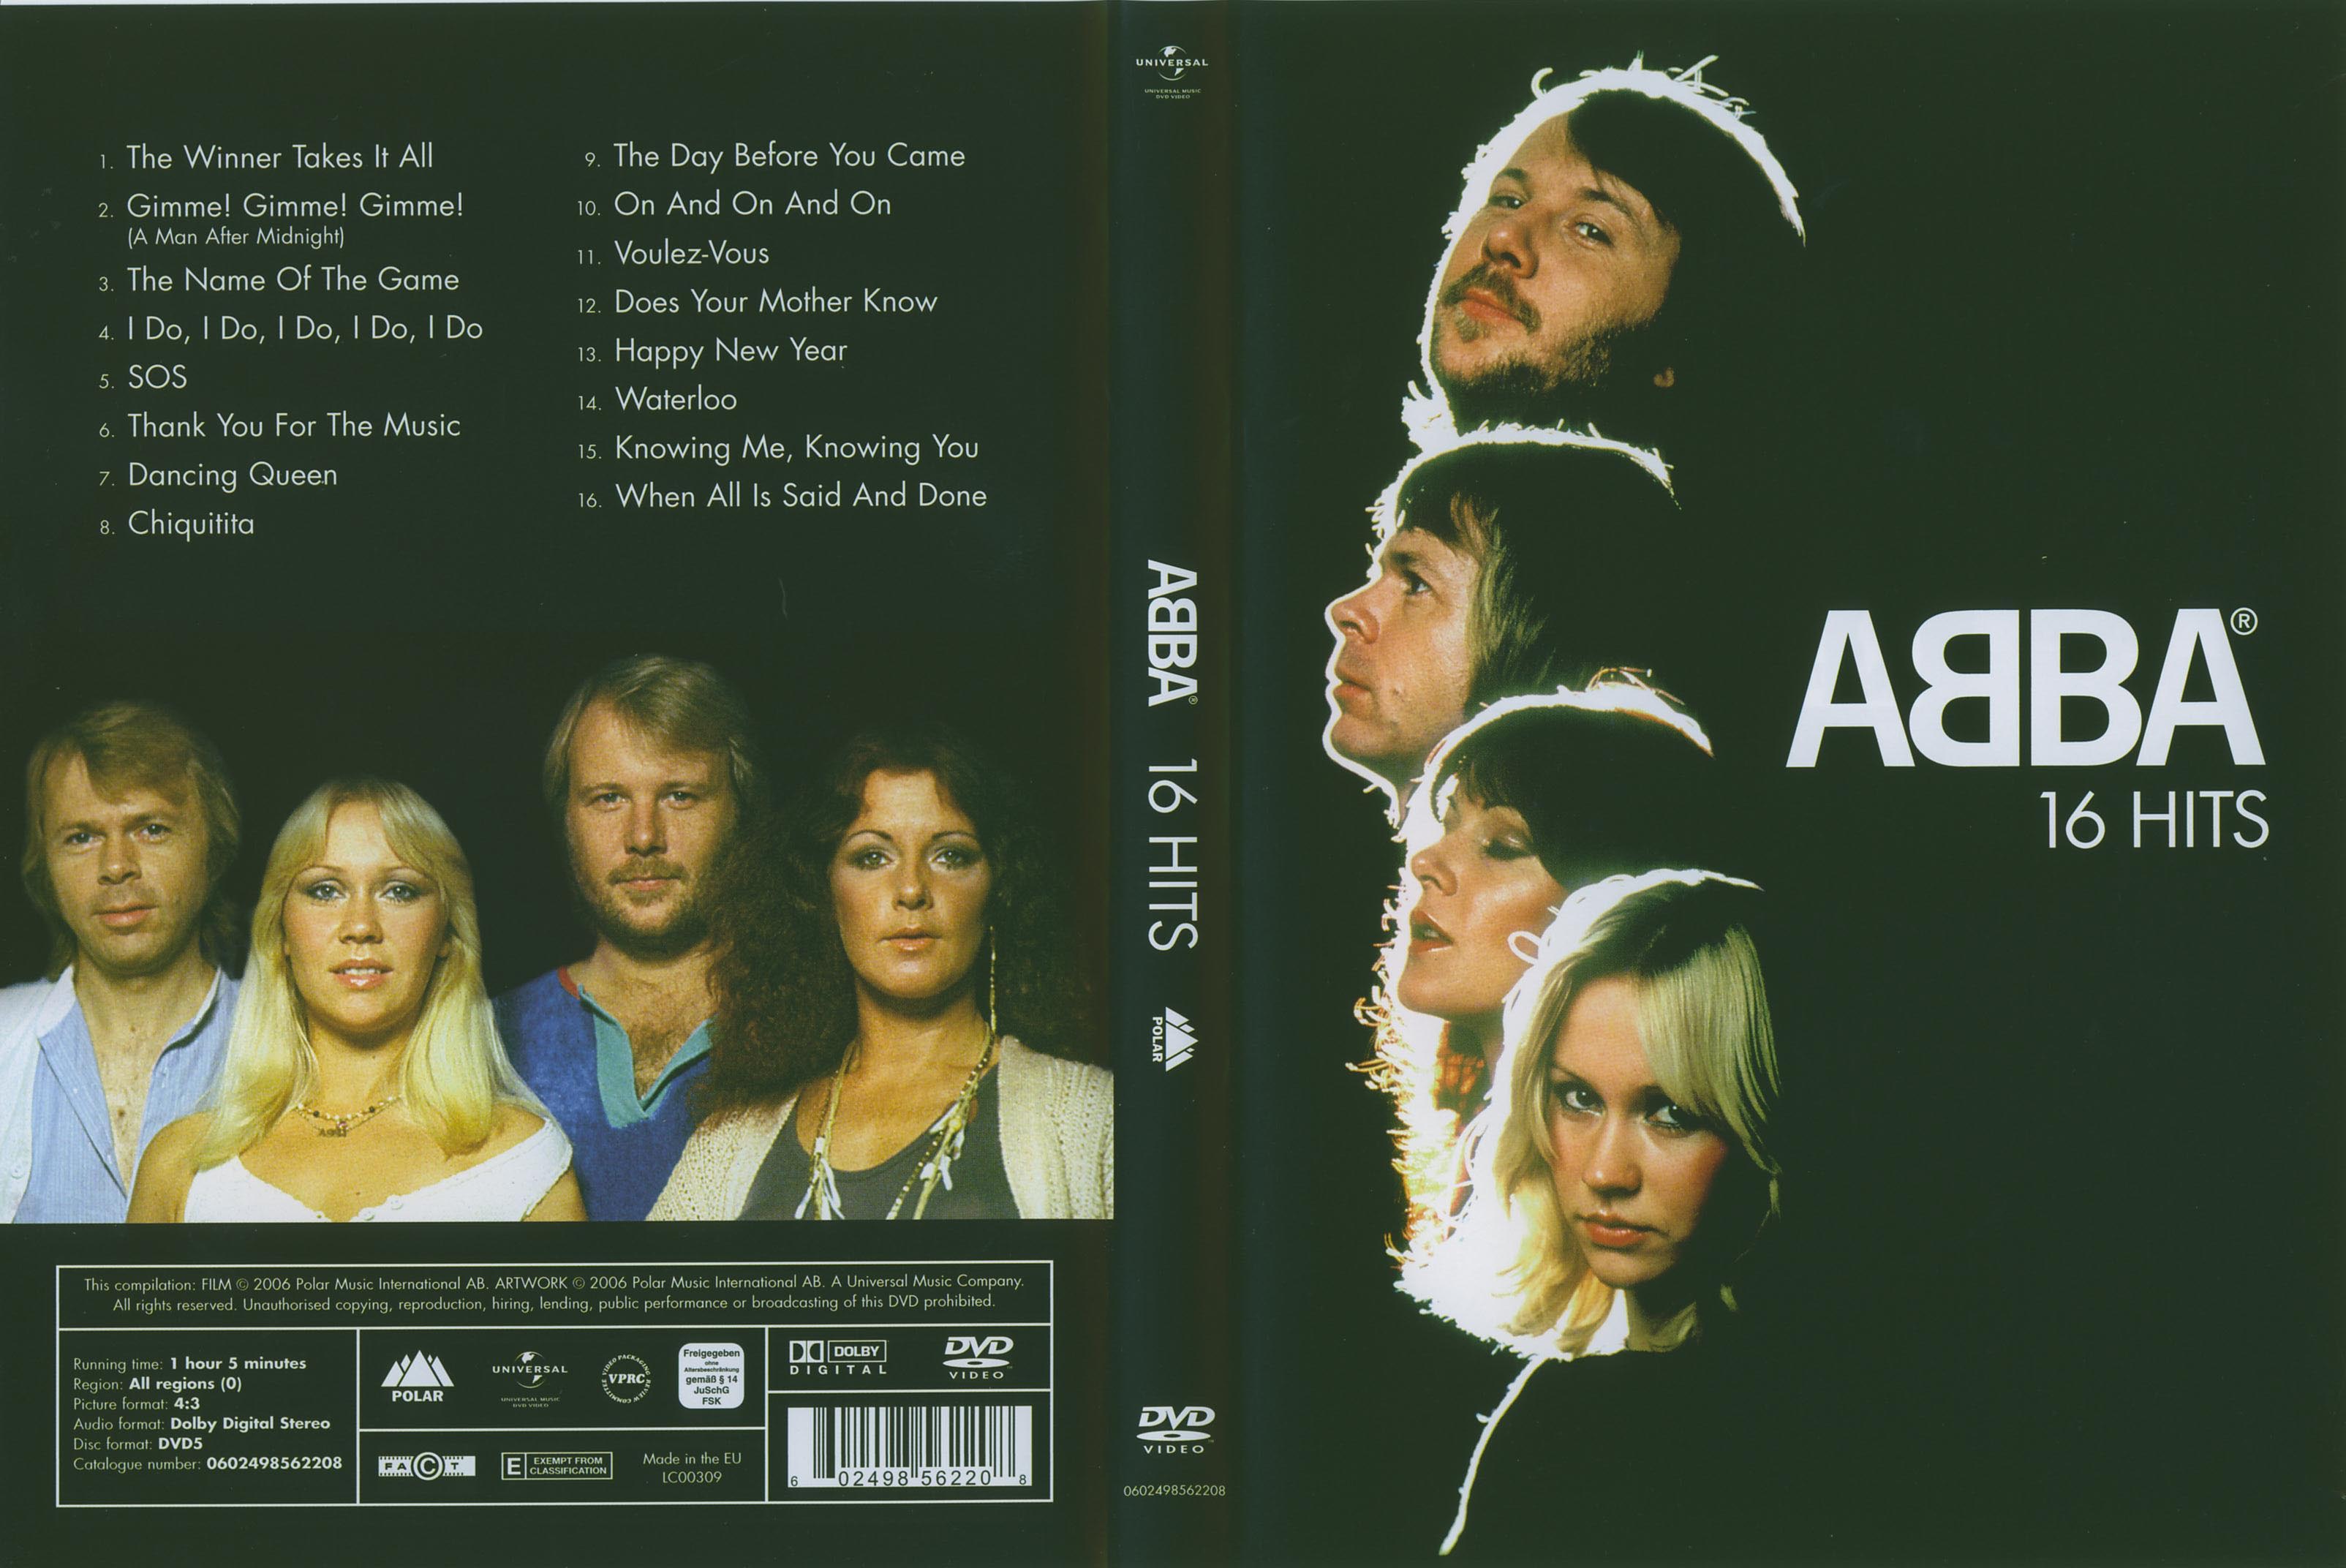 Jaquette DVD ABBA 16 Hits